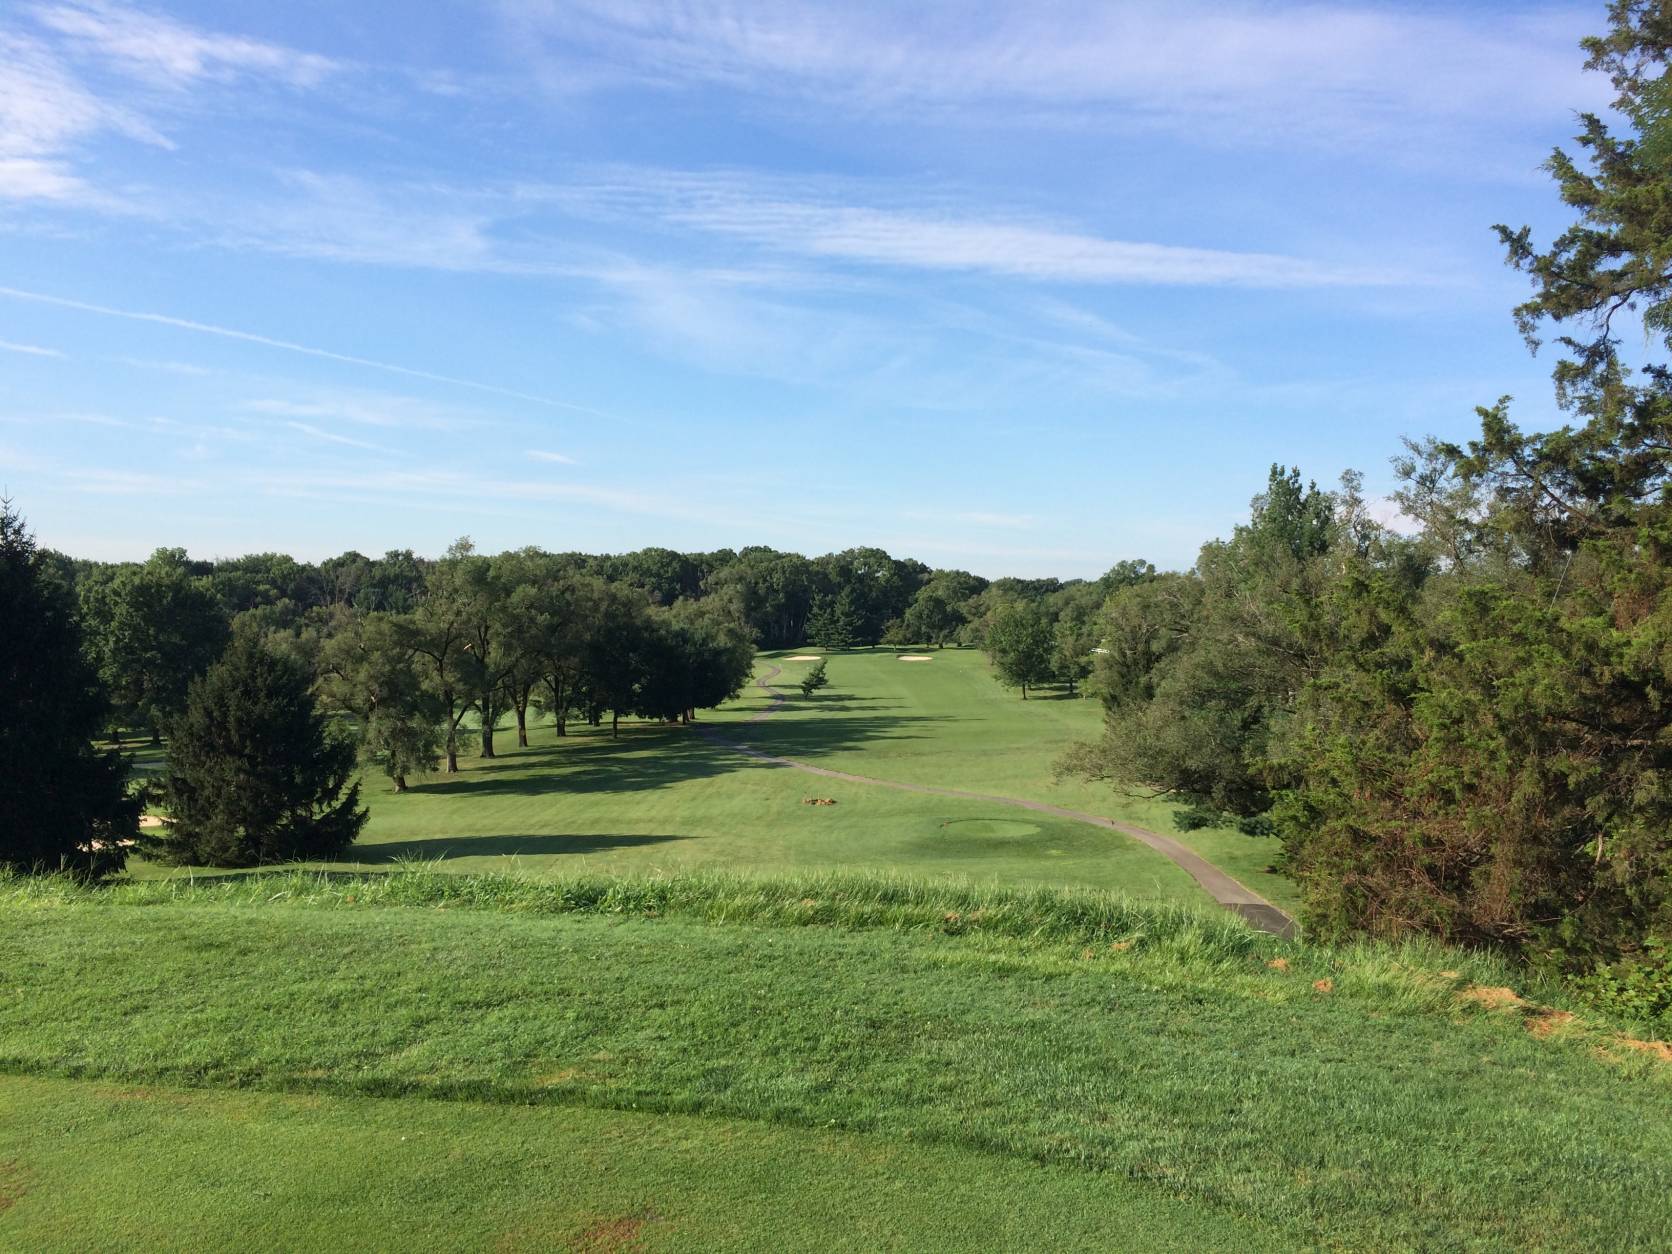 The view from the first tee at Glenn Dale Golf Course.